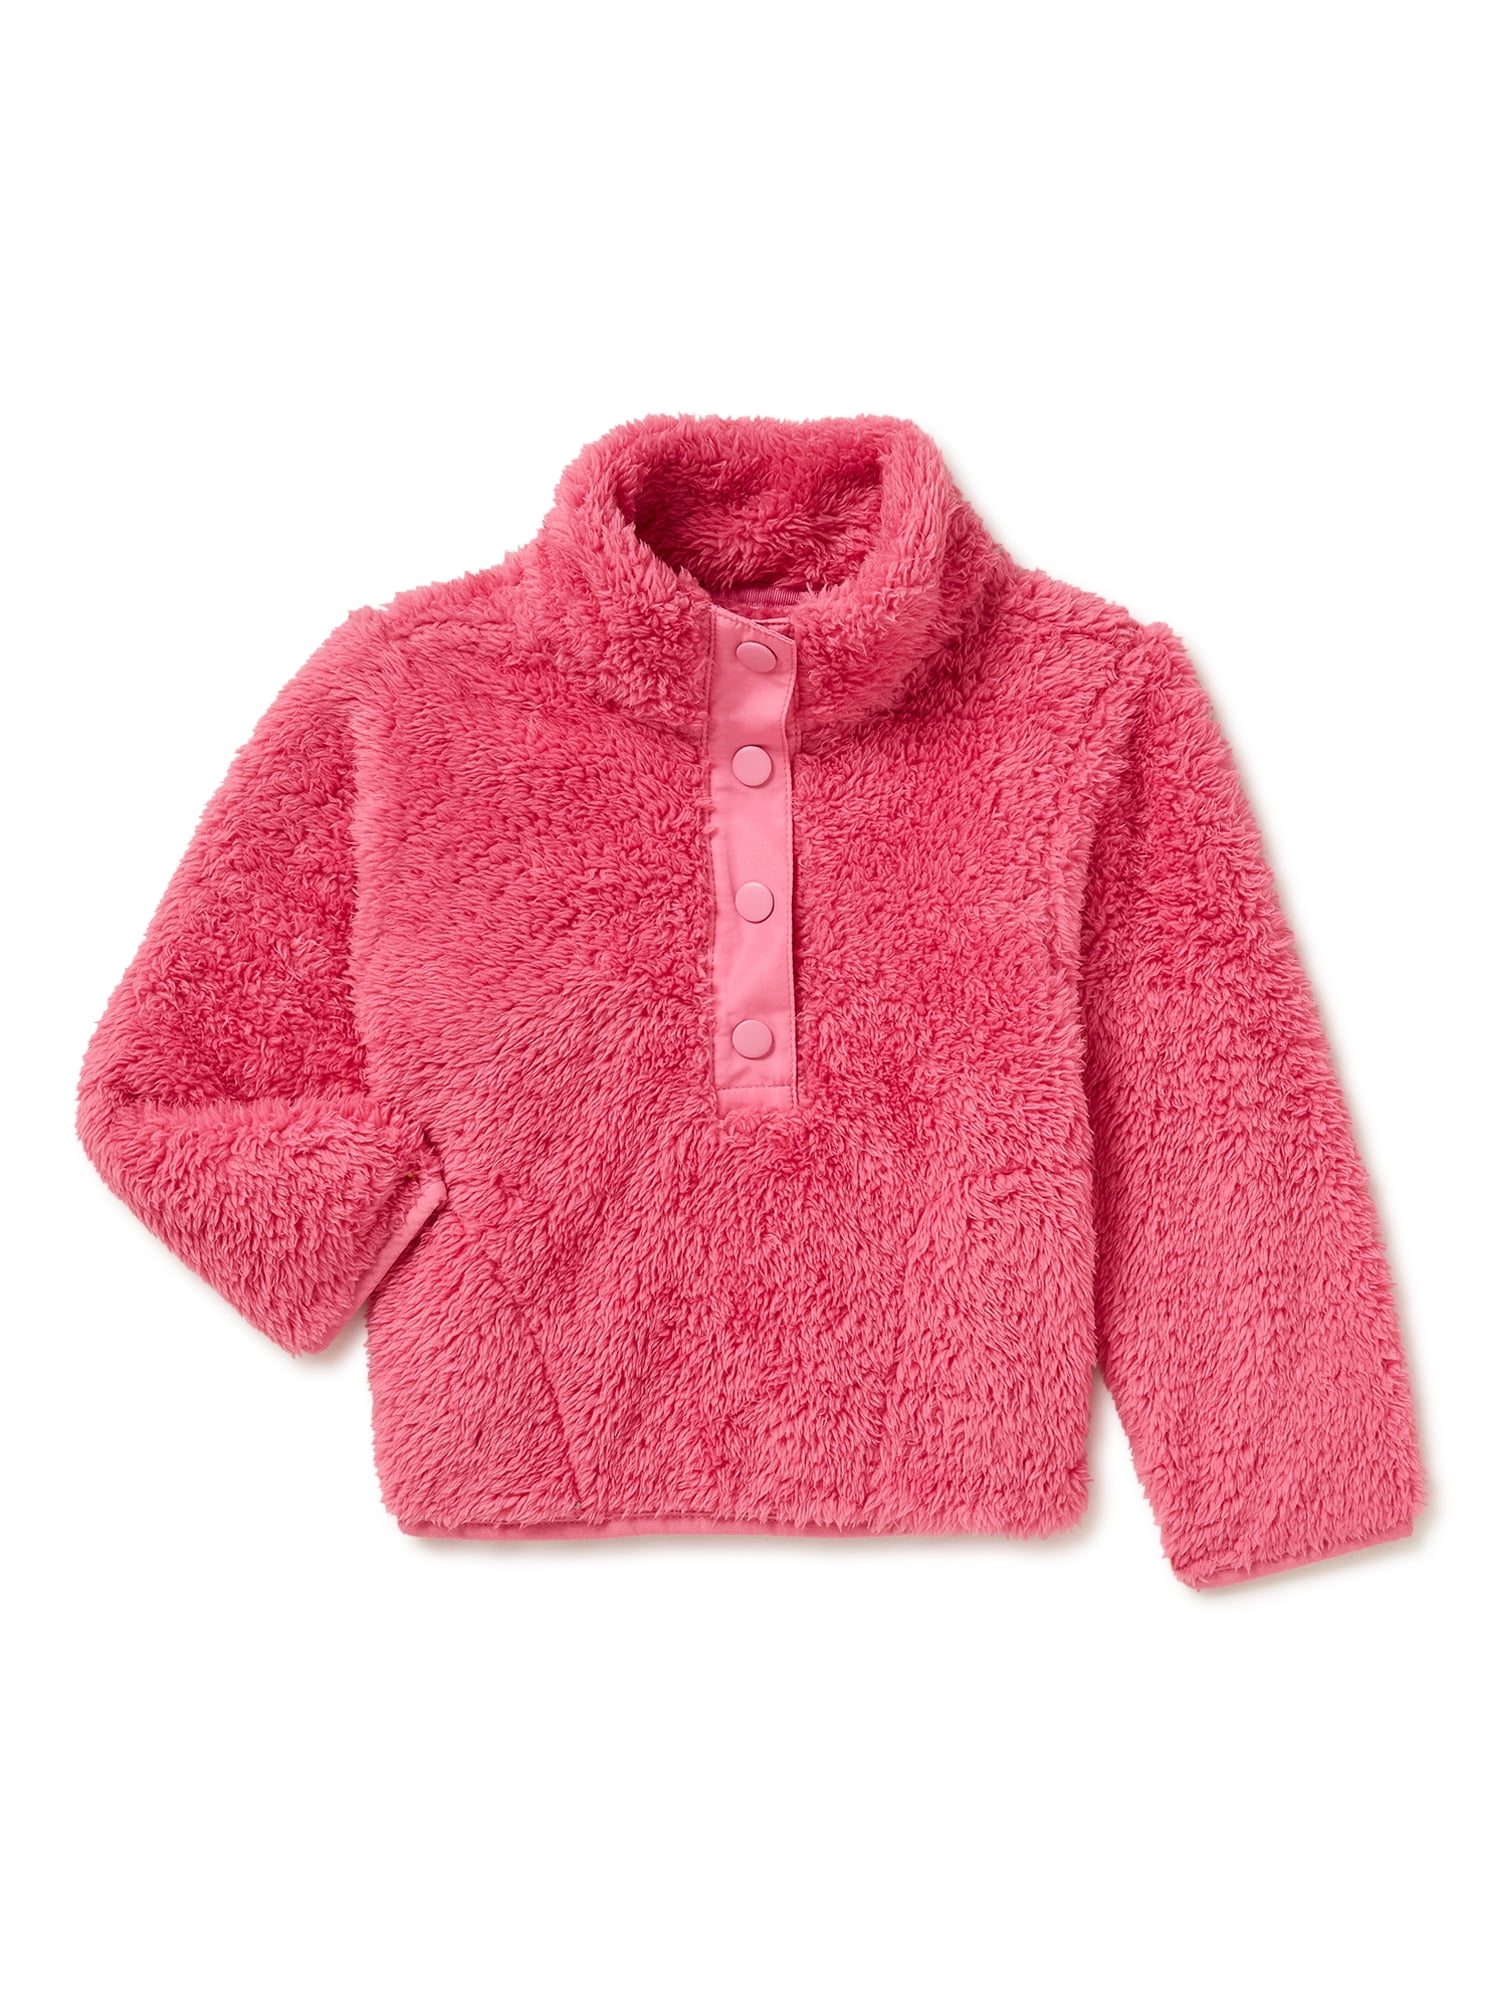 Wonder Nation Baby and Toddler Sherpa Pullover Jacket, Sizes 12M-5T